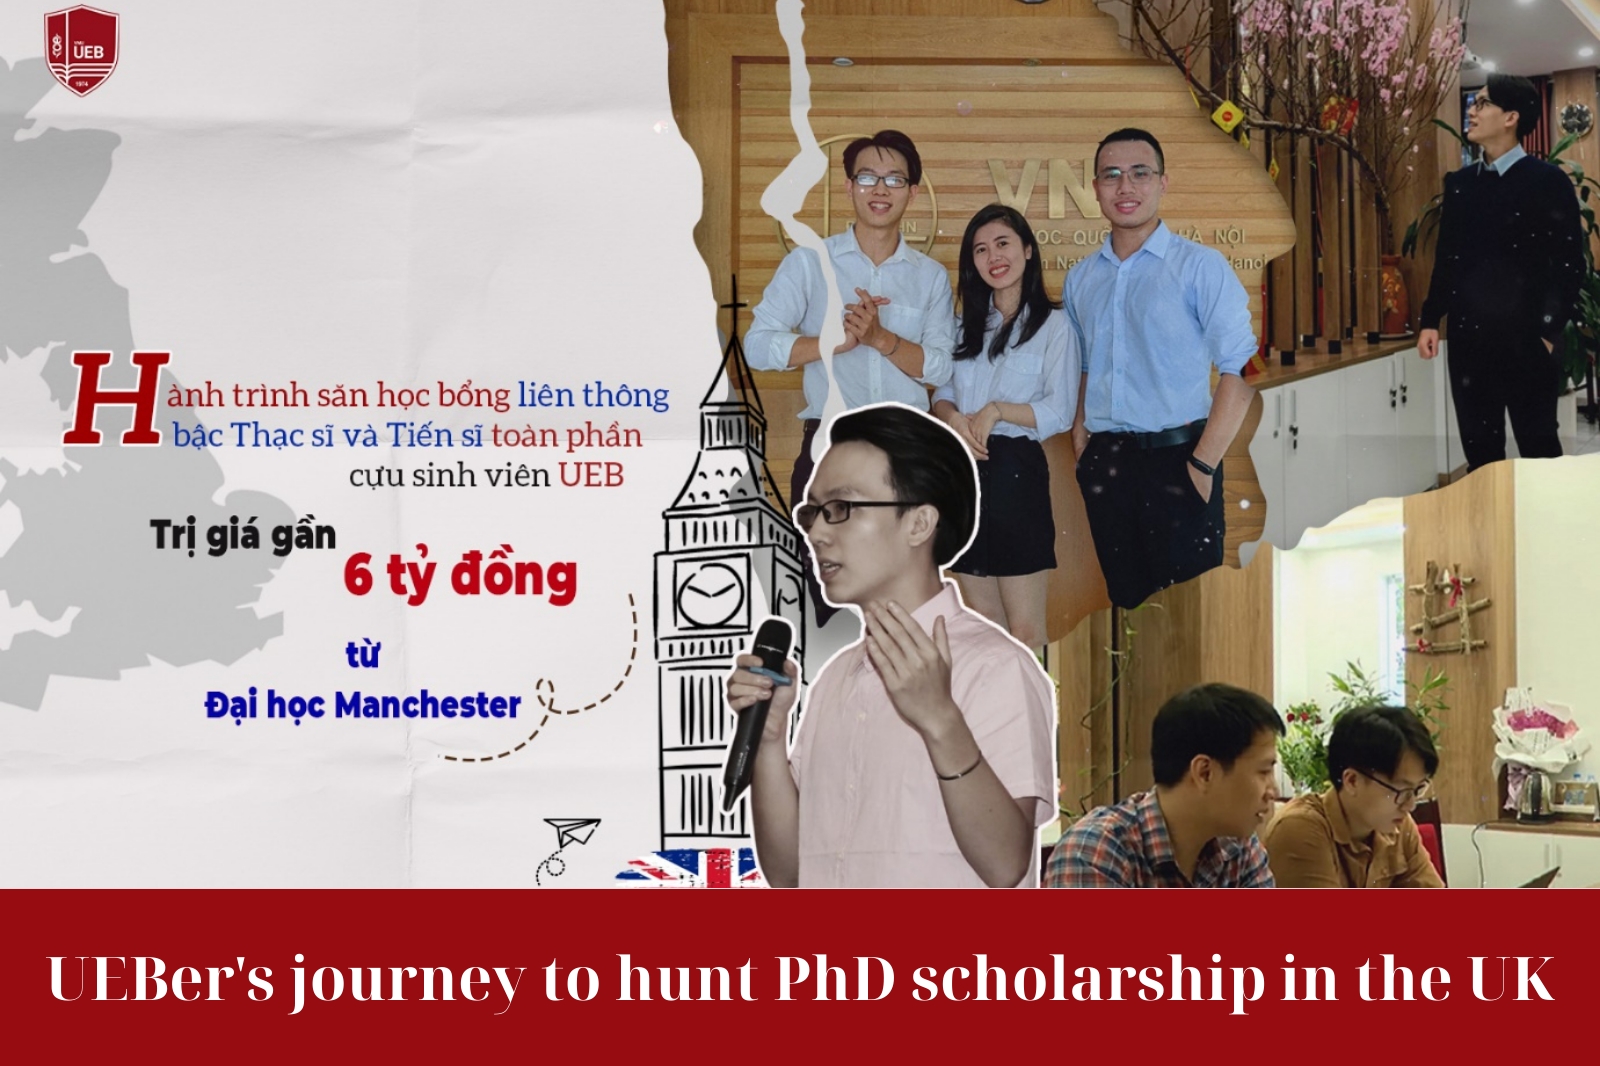 UEBer's journey to hunt PhD scholarship in the UK